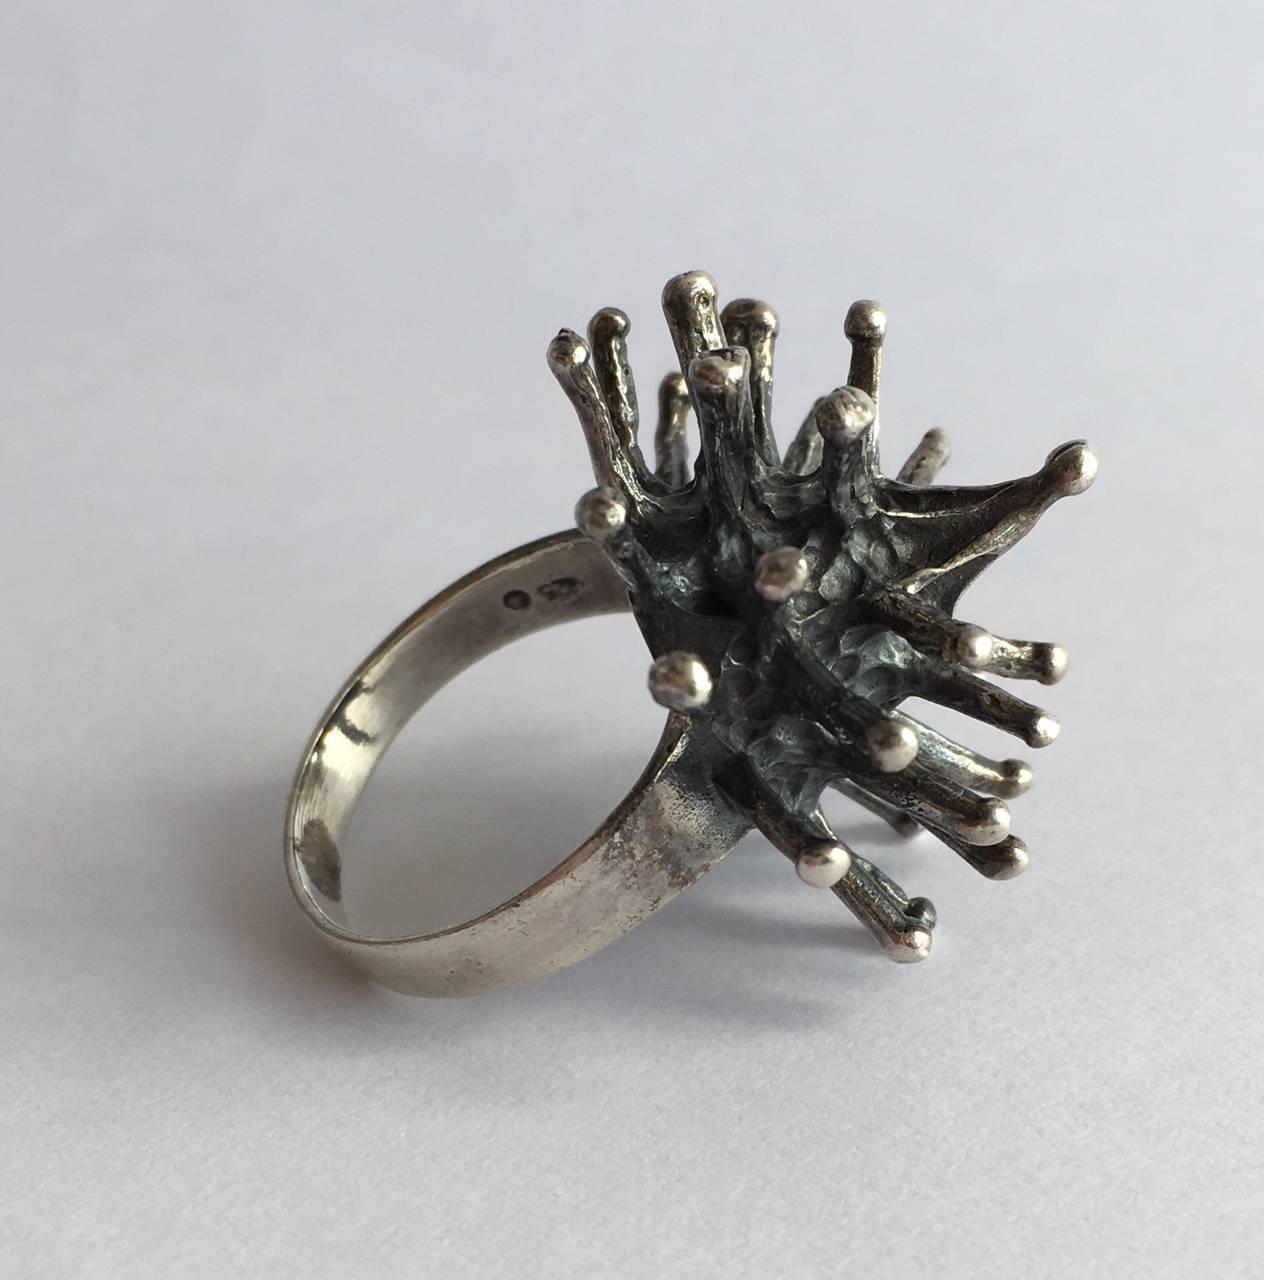 Modernist Vintage Jewelry Silver Flower Rings Abstract Starburst Sculpture Architectural